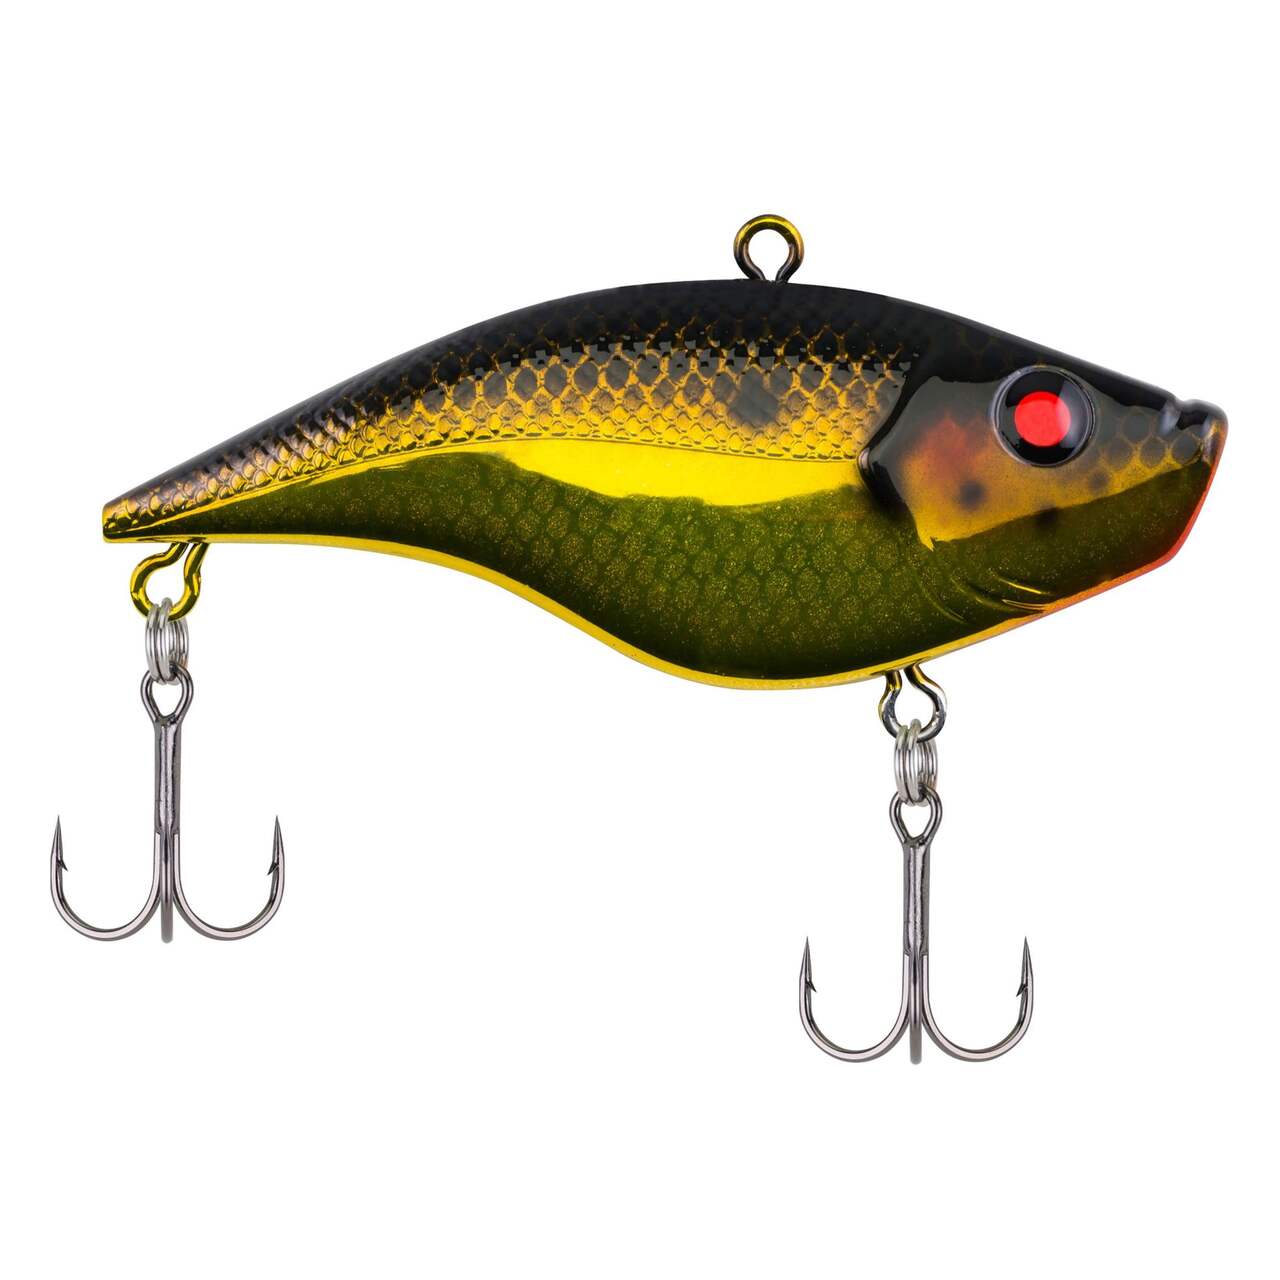 Skip Casting: Best (& Worst) Fishing Lures For Skipping Under